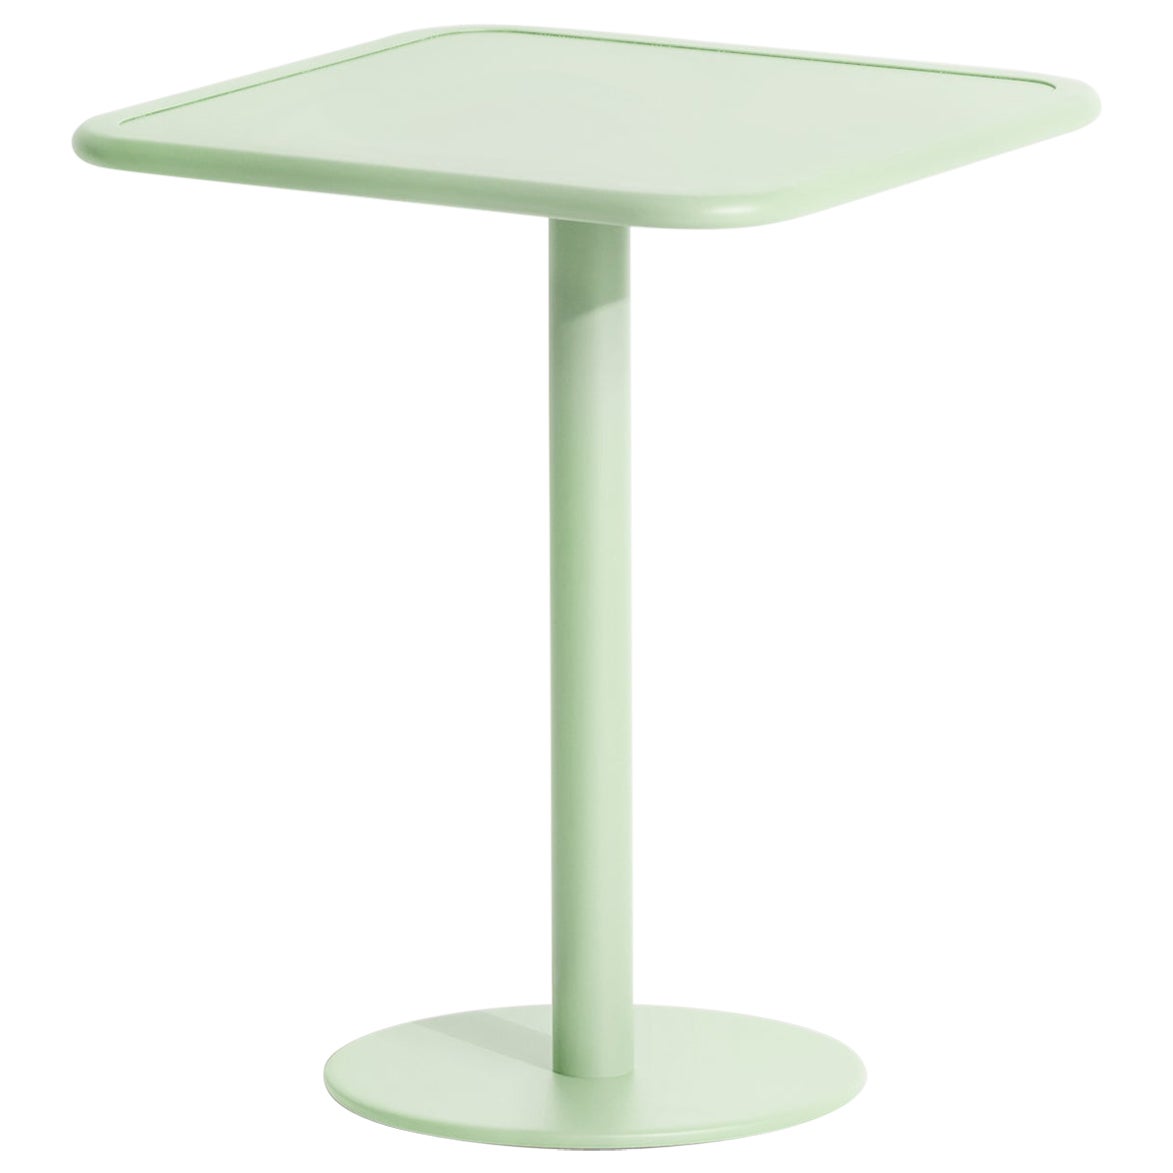 Petite Friture Week-End Bistro Square Dining Table in Pastel Green Aluminium